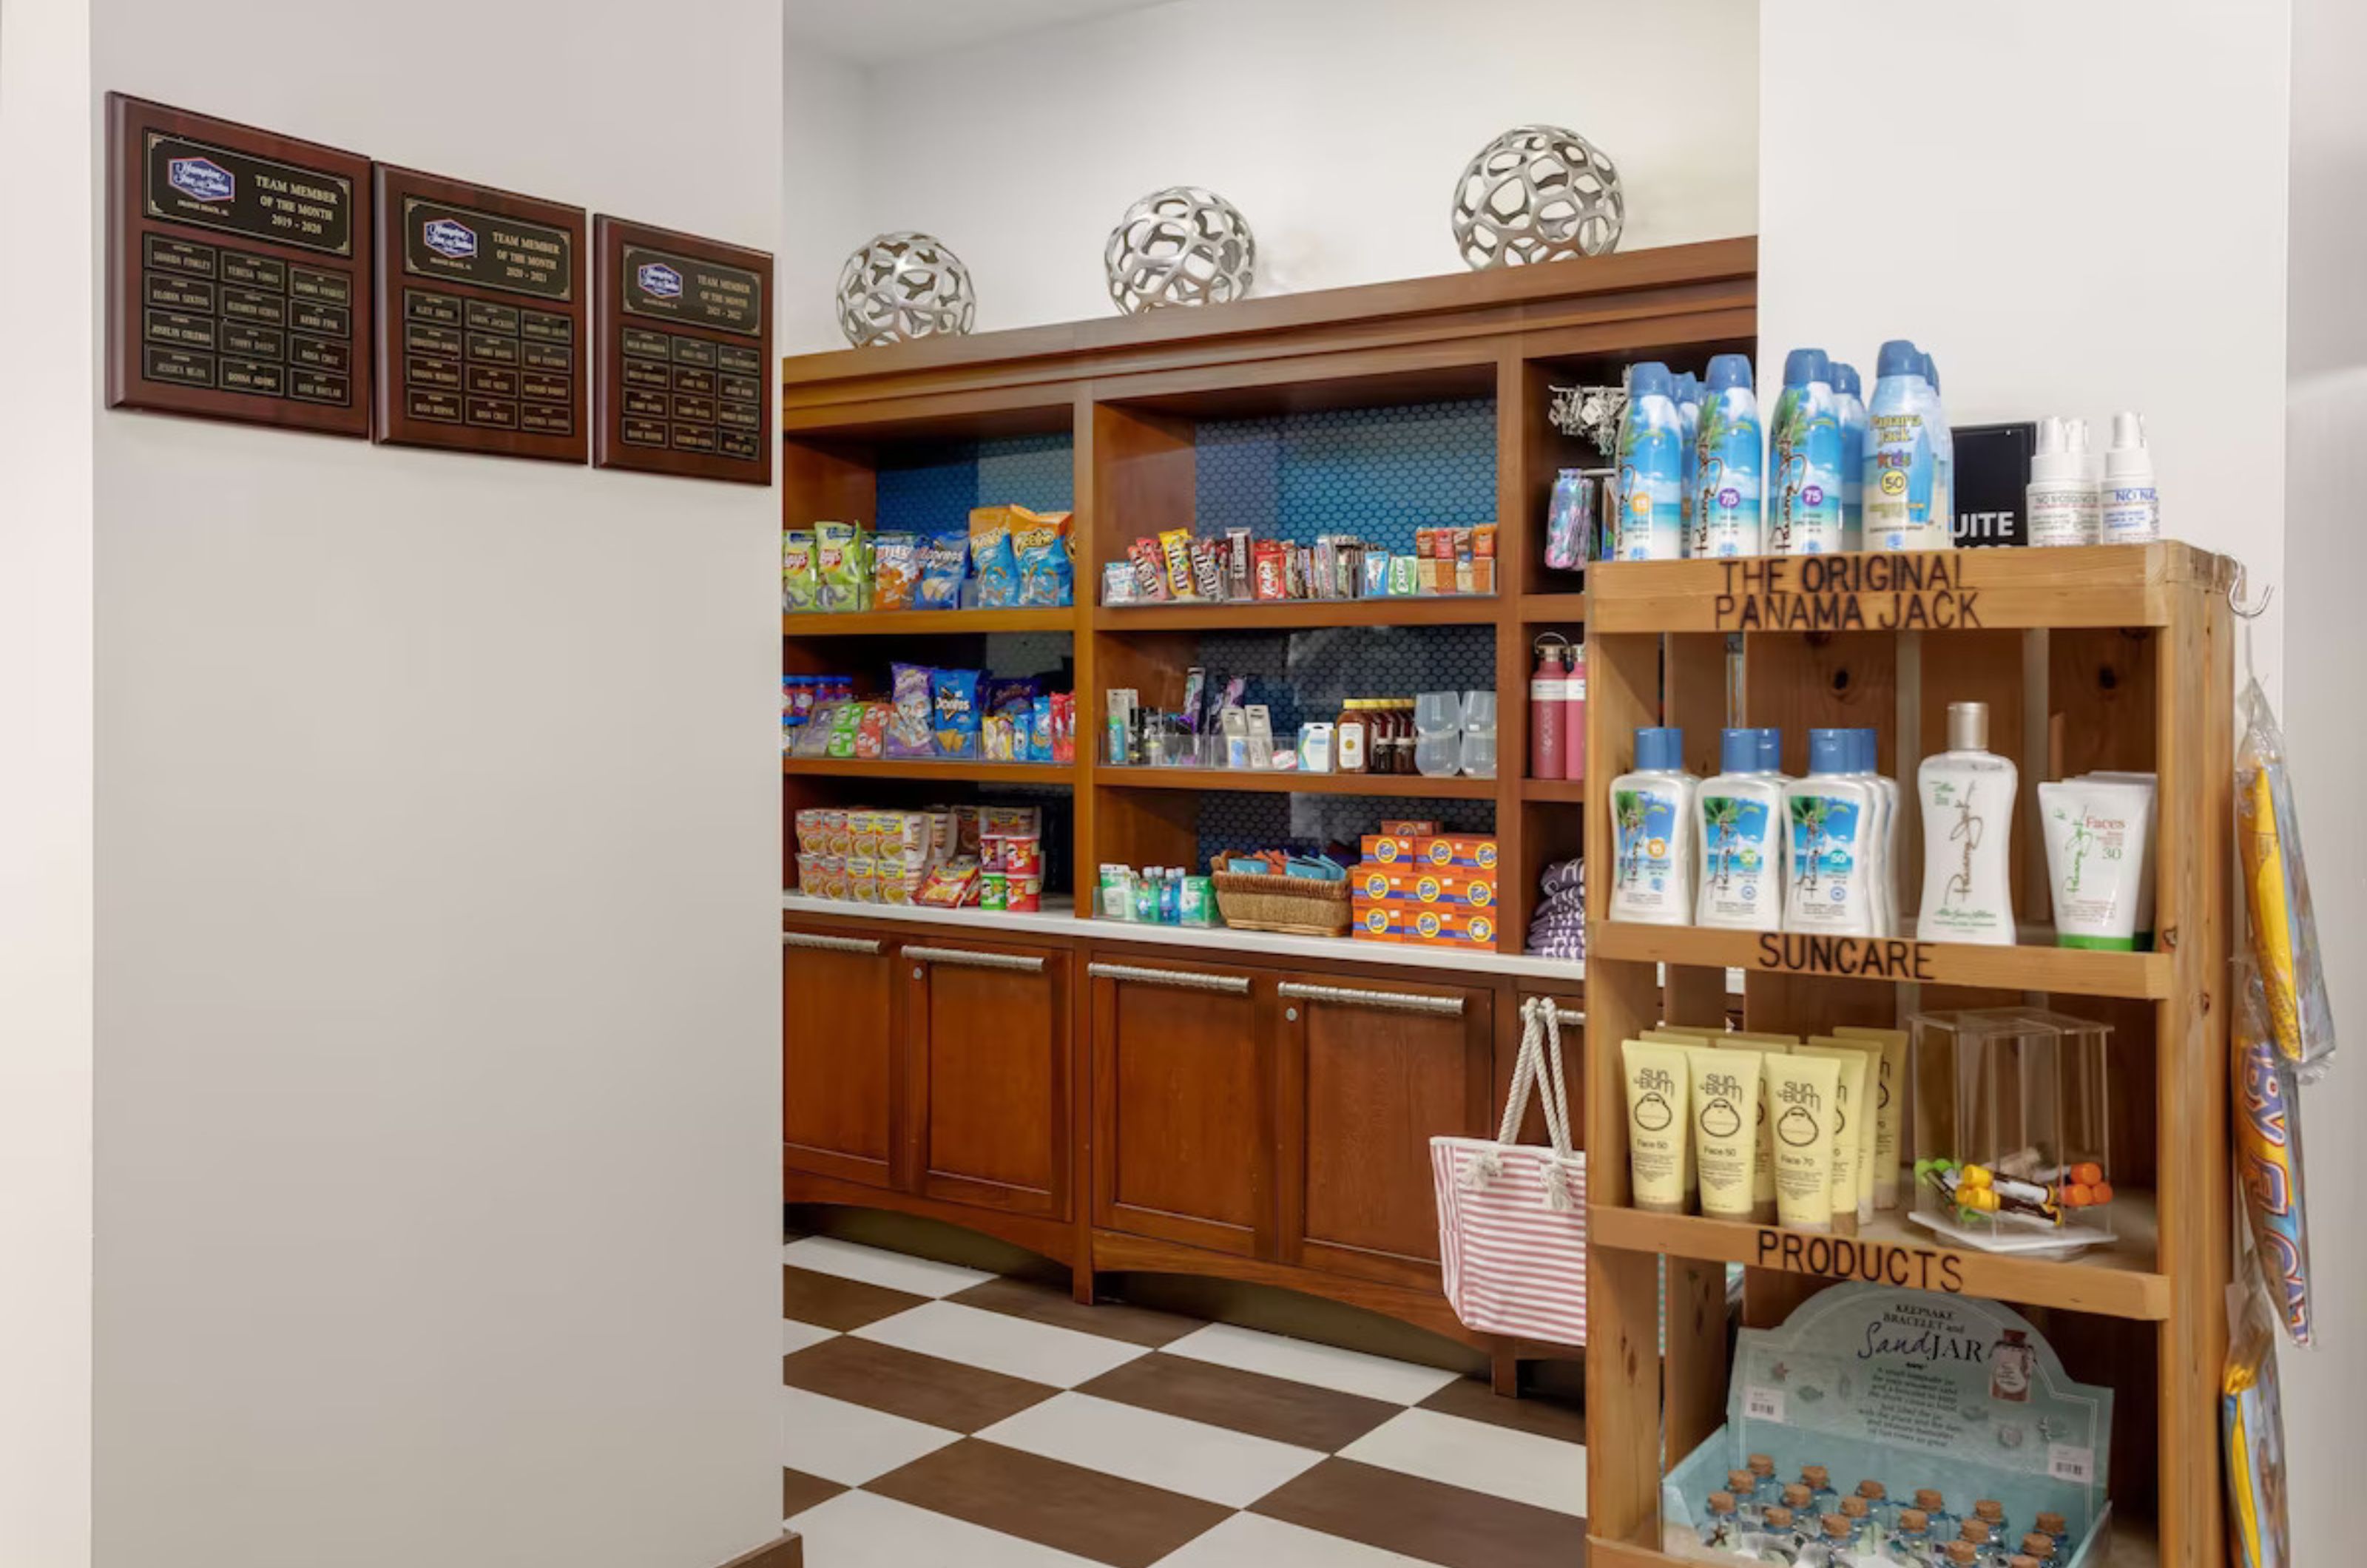 Shelves with snacks and toiletries in the on-site convenience store